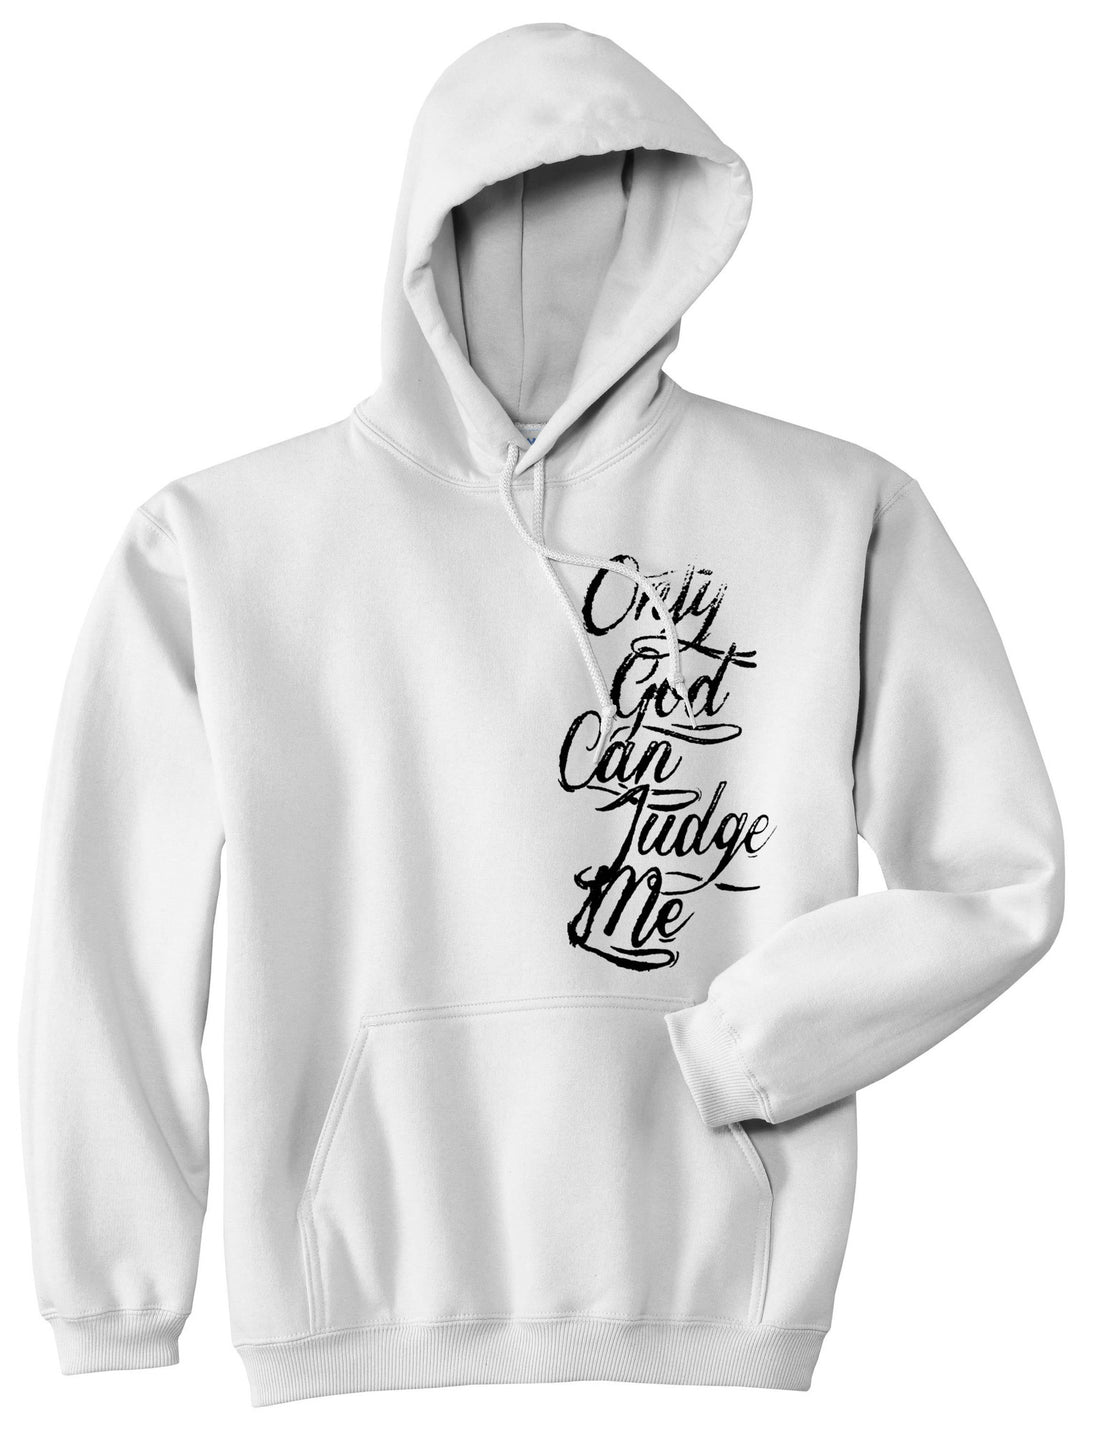 Only God Can Judge Me Vintage Pullover Hoodie